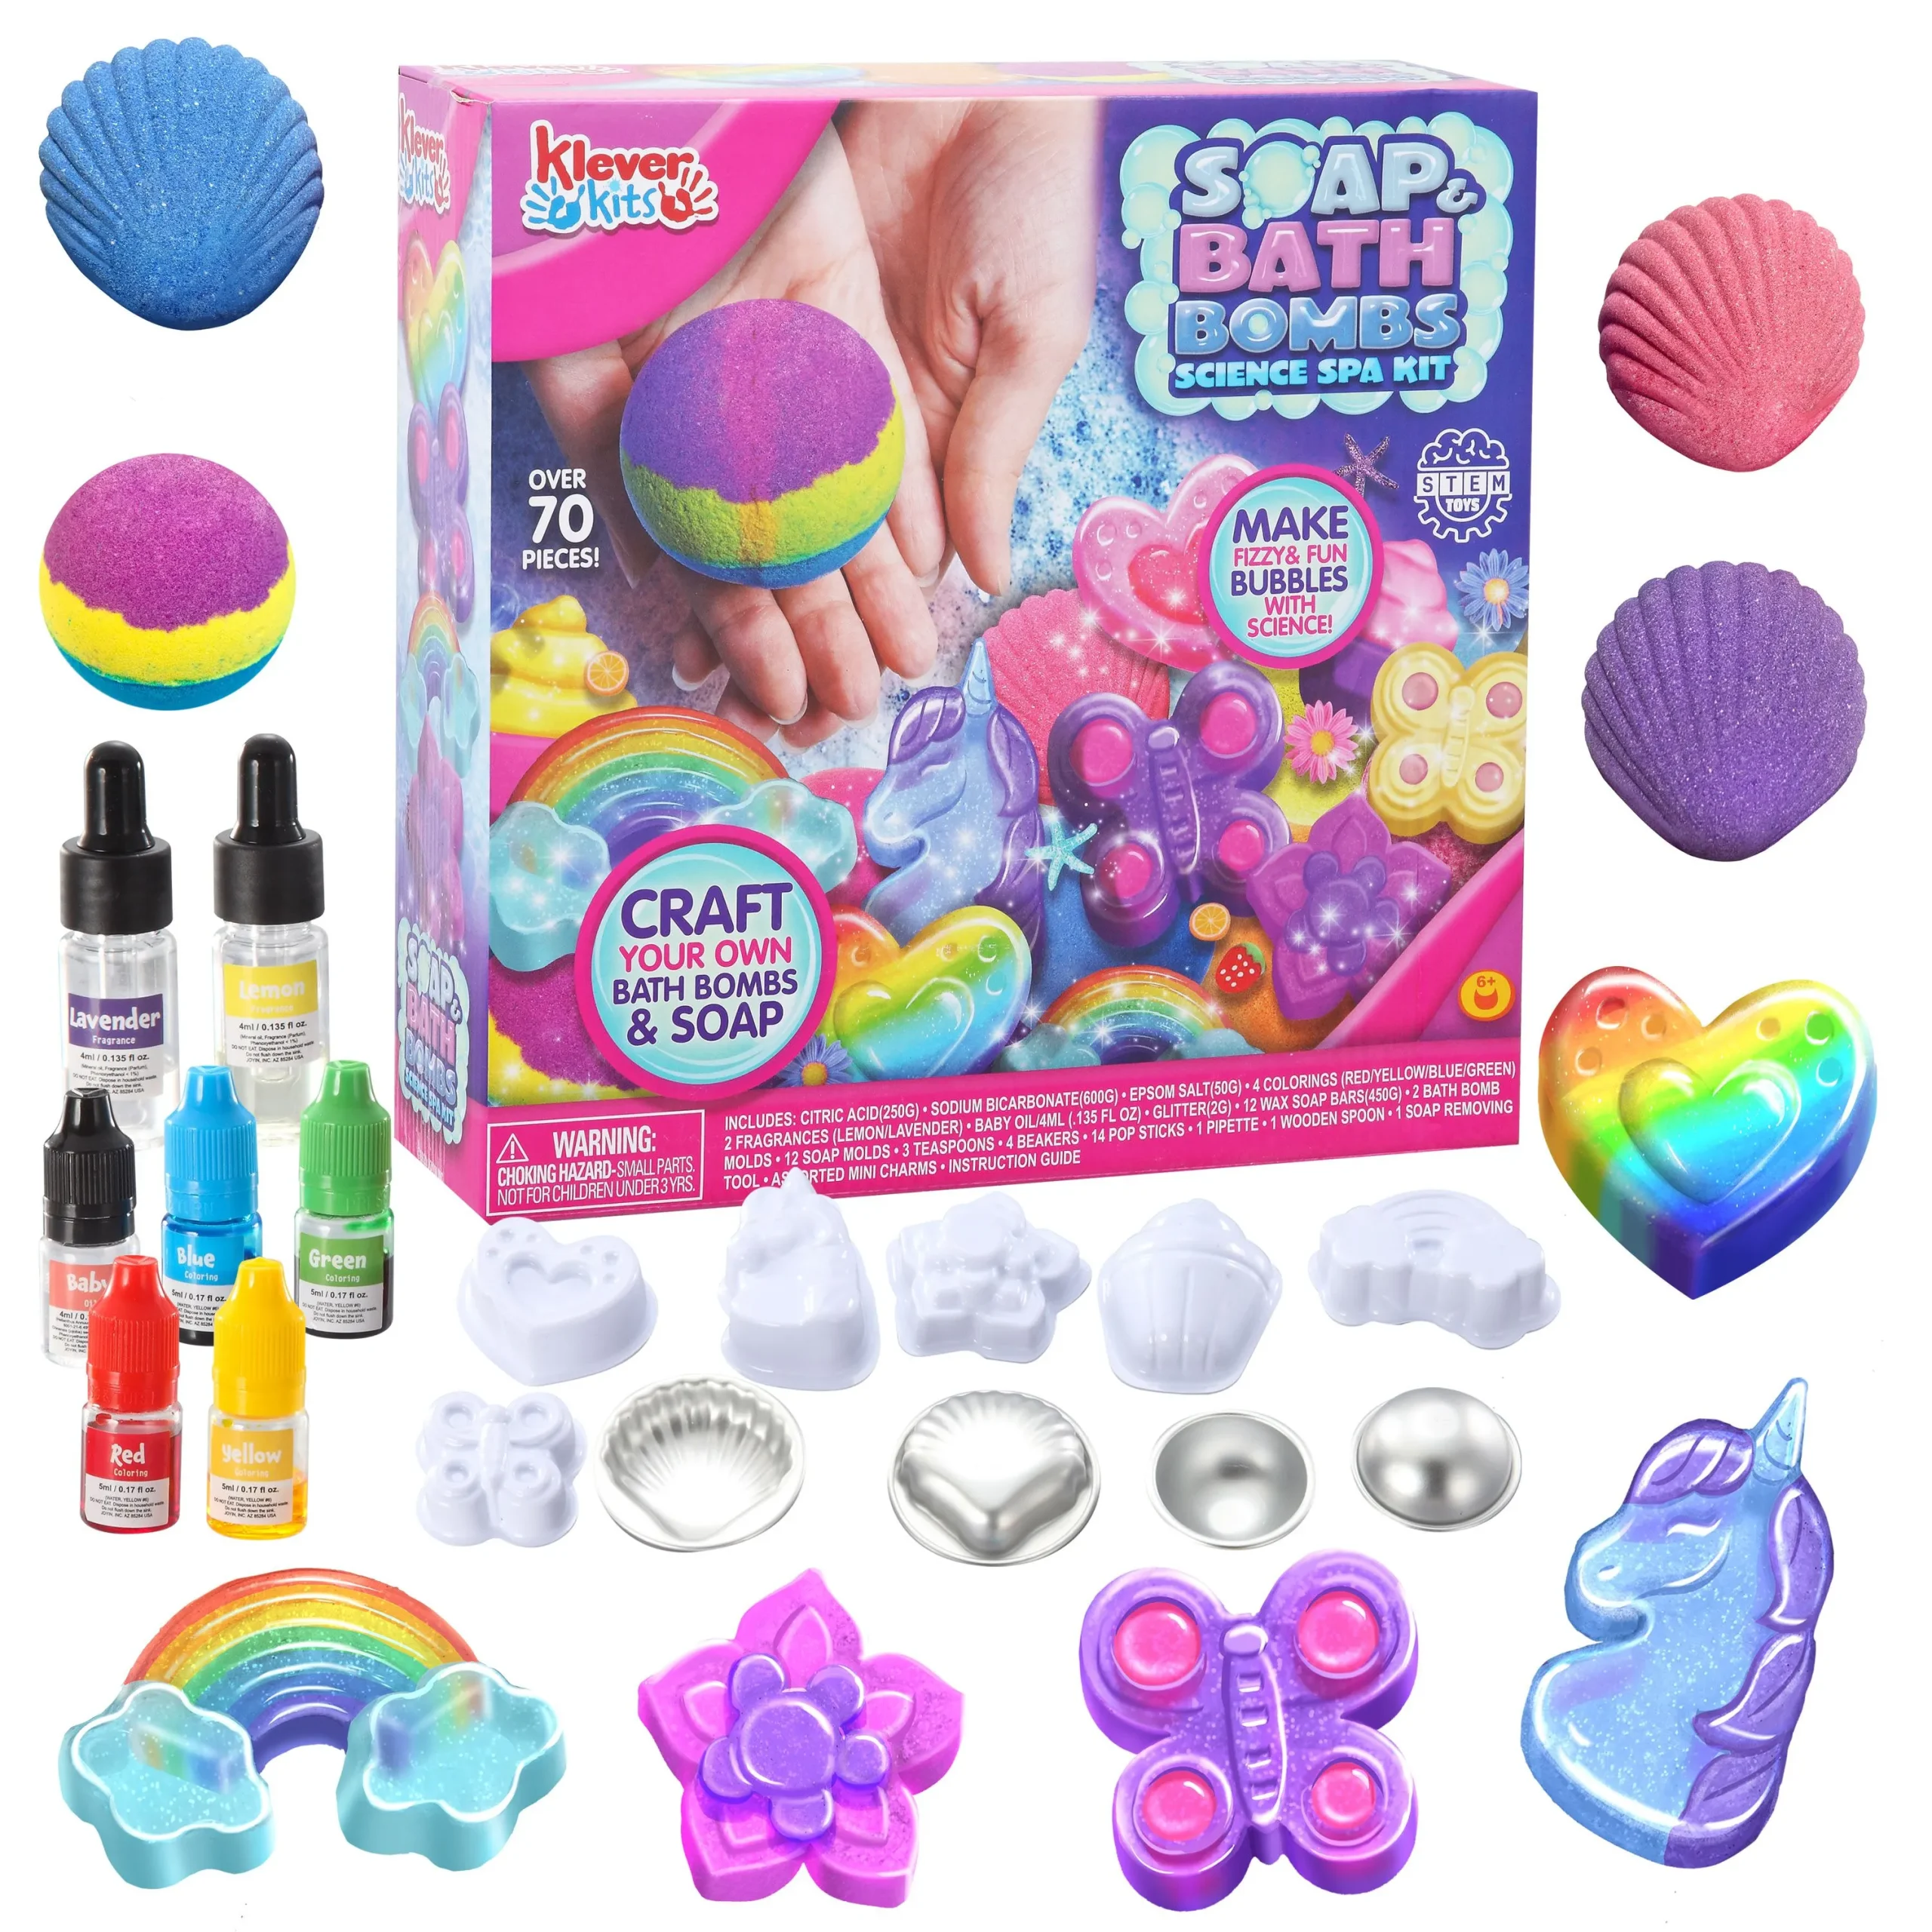 JOYIN Bath Bomb, Soap Making Kit for Kids, 2-in-1 Spa Stem Science Kits, DIY Make Your Own Bath Bombs & Soap, Spa Kit for Girls, Christmas Gifts for